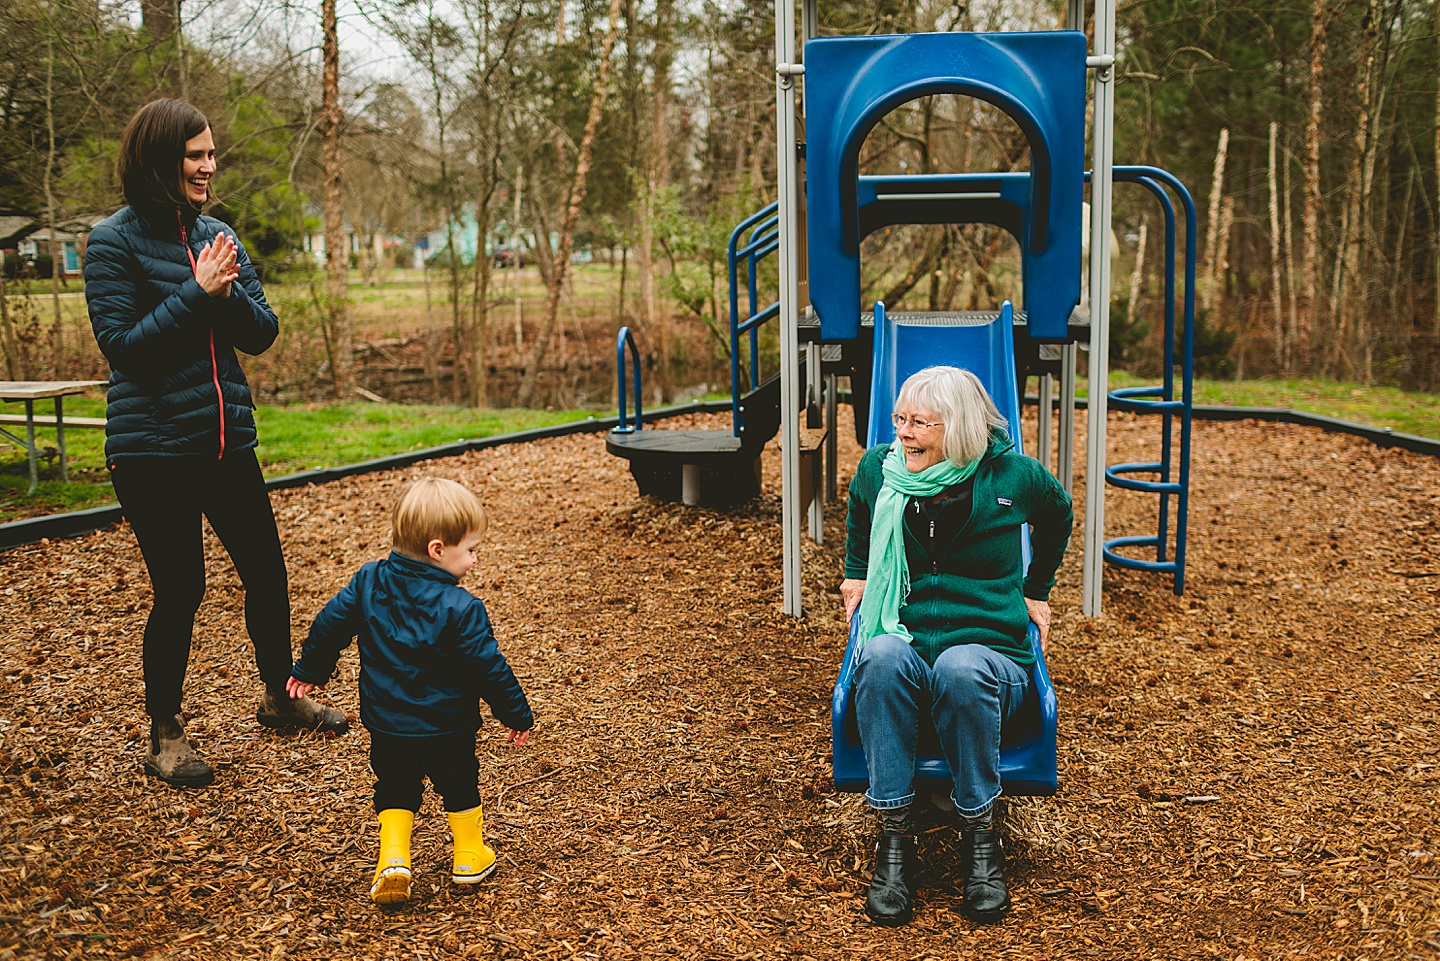 Grandma using the slide at park while playing with grandson